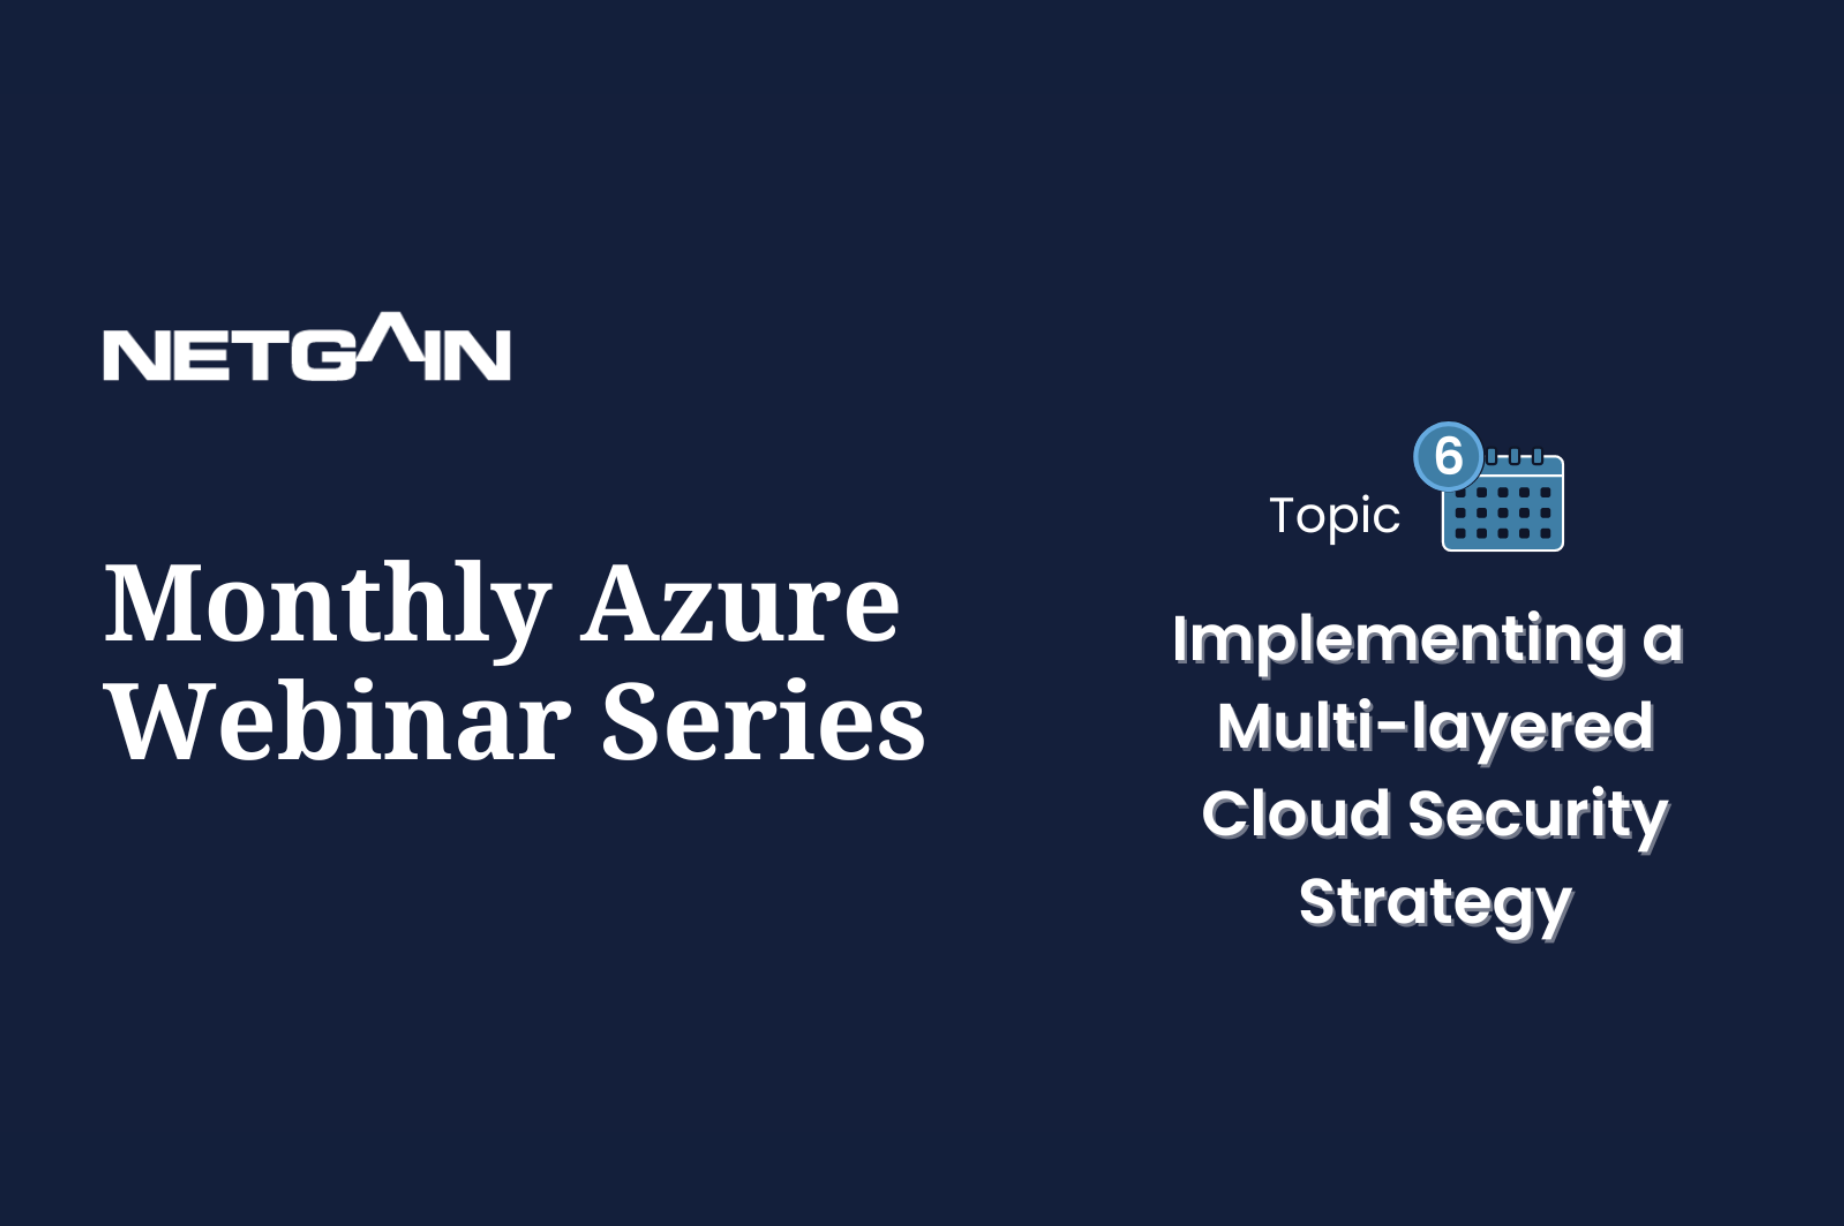 Monthly Azure Webinar Series: Implementing a Multi-layered Cloud Security Strategy